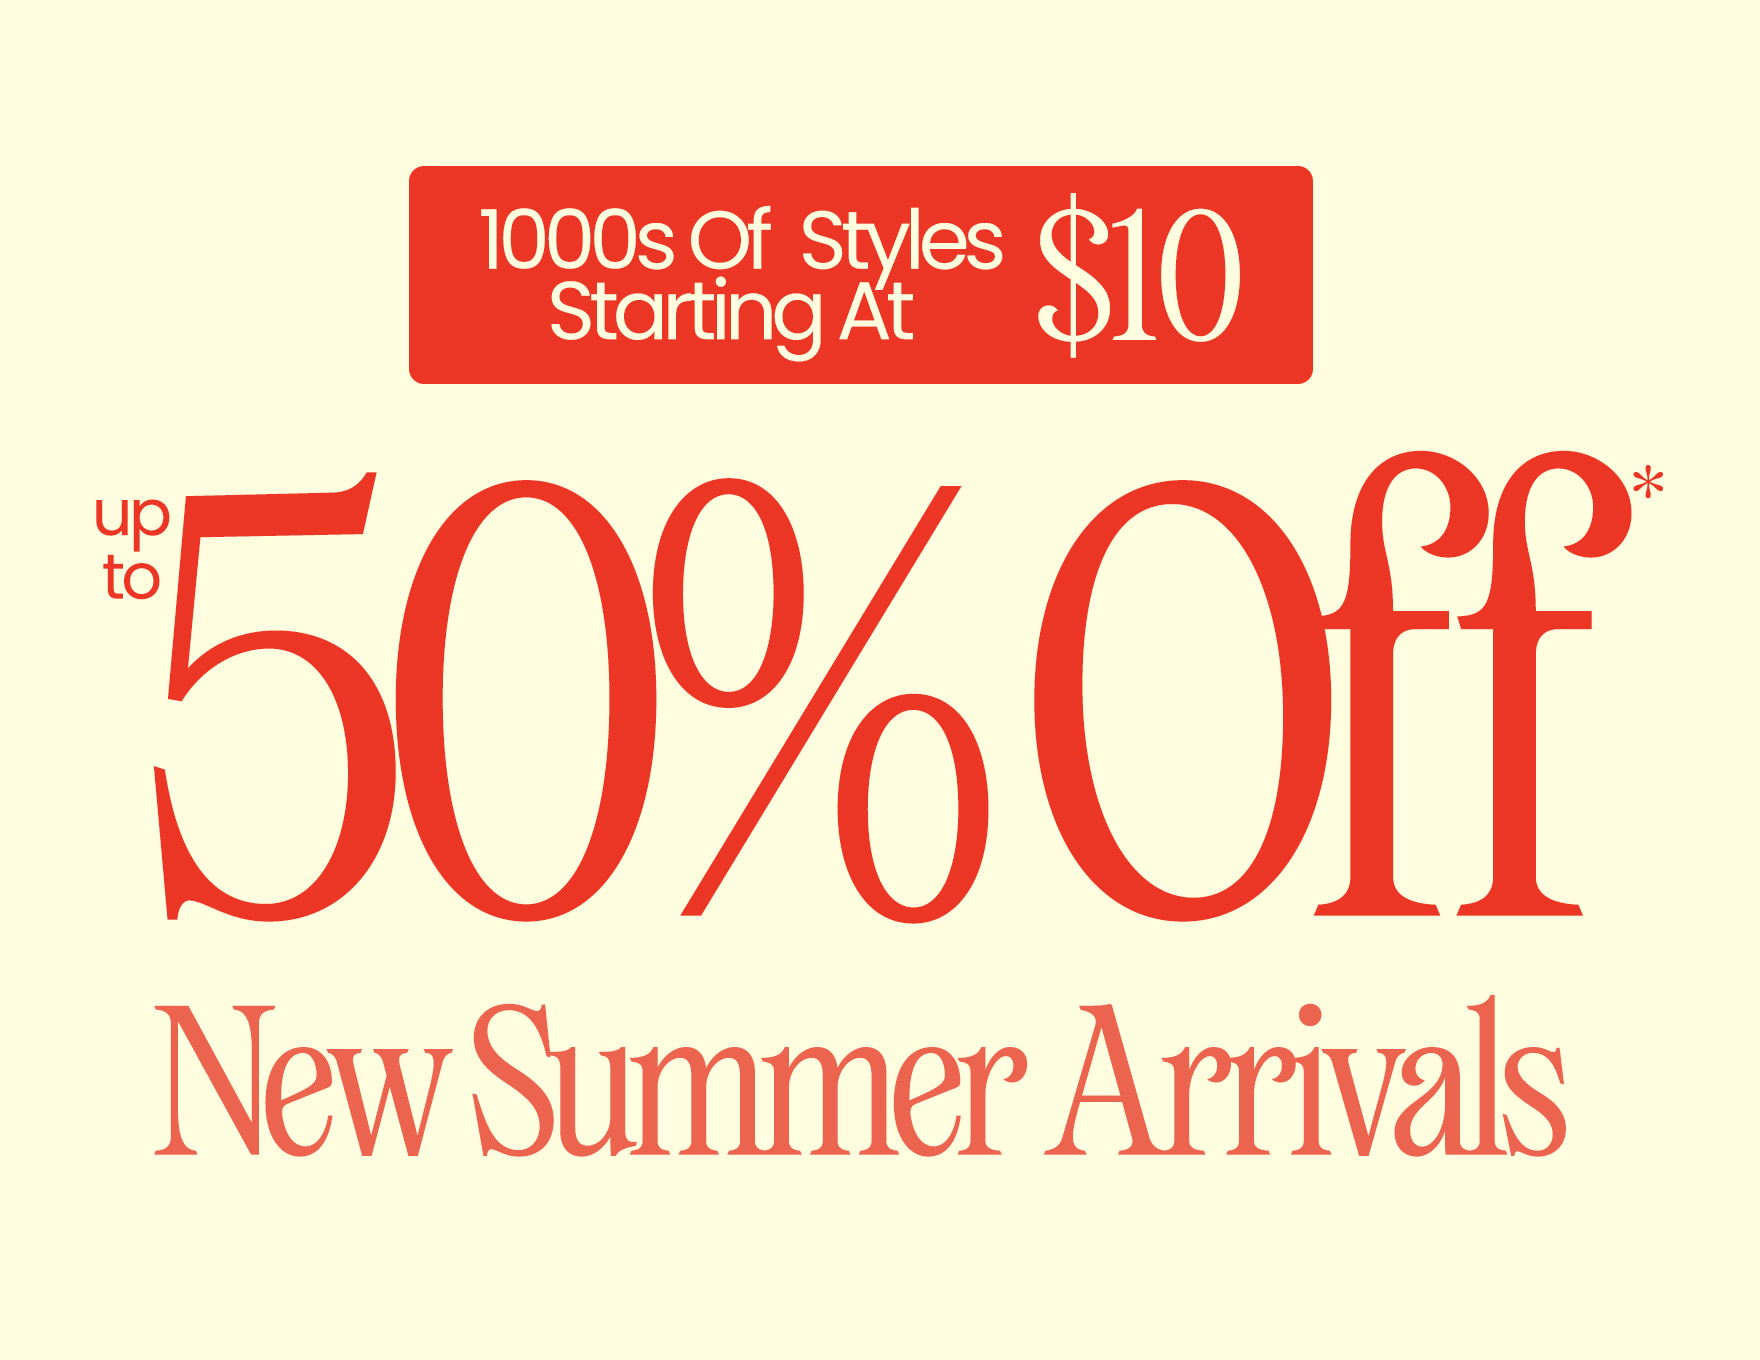 Up To 50% Off* New Summer Arrivals 1000s of Styles Starting at $10